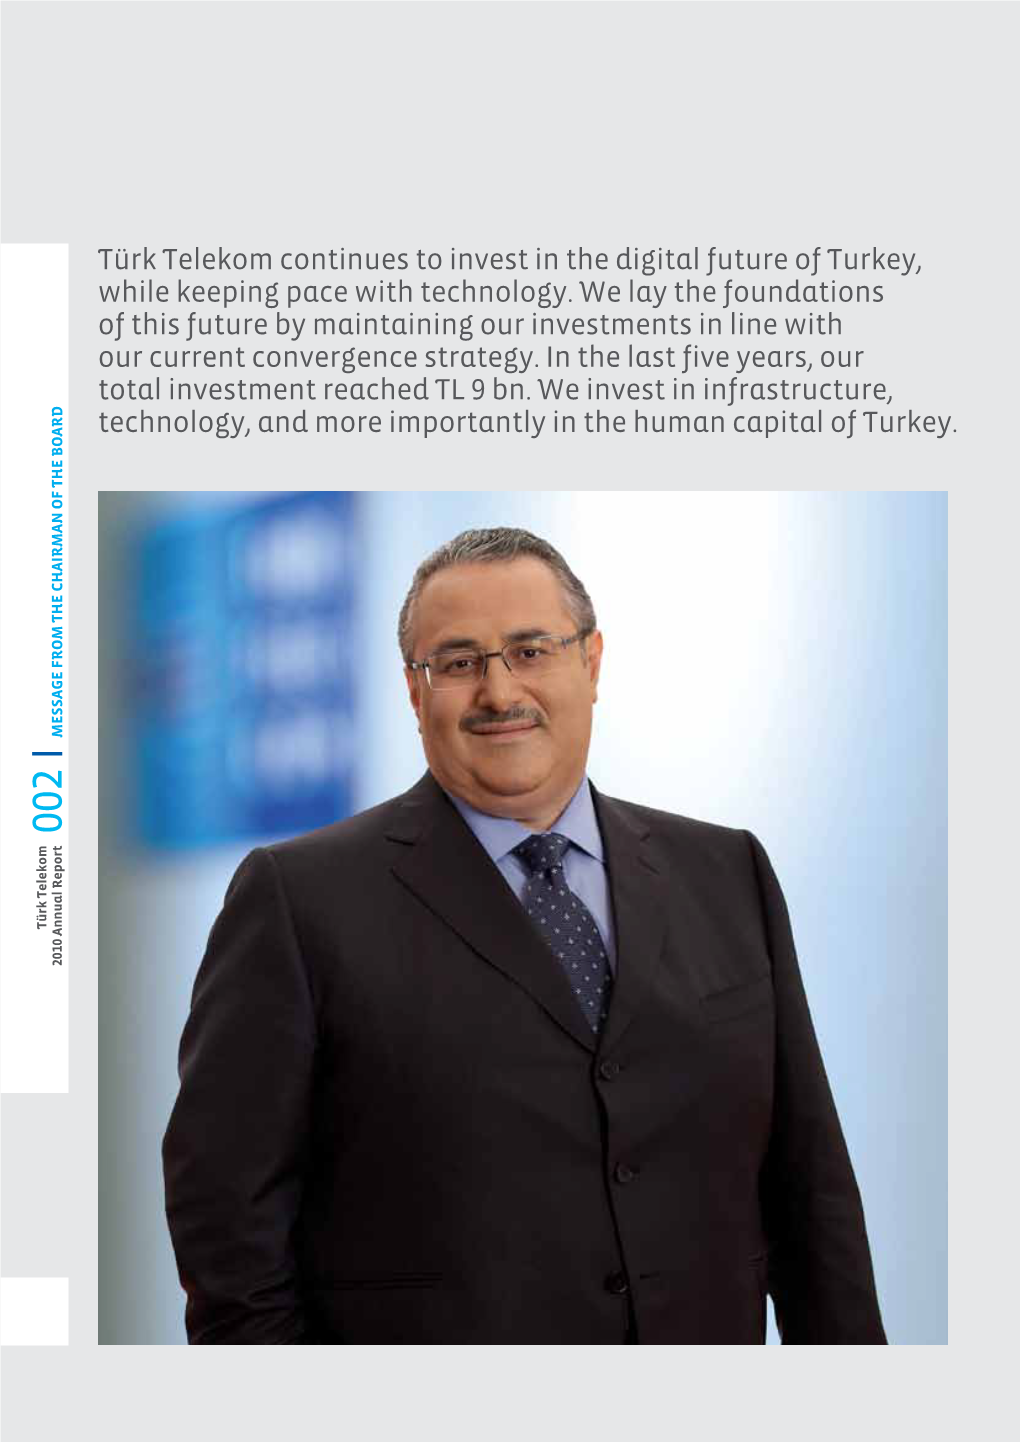 Türk Telekom Continues to Invest in the Digital Future of Turkey, While Keeping Pace with Technology. We Lay the Foundations Of